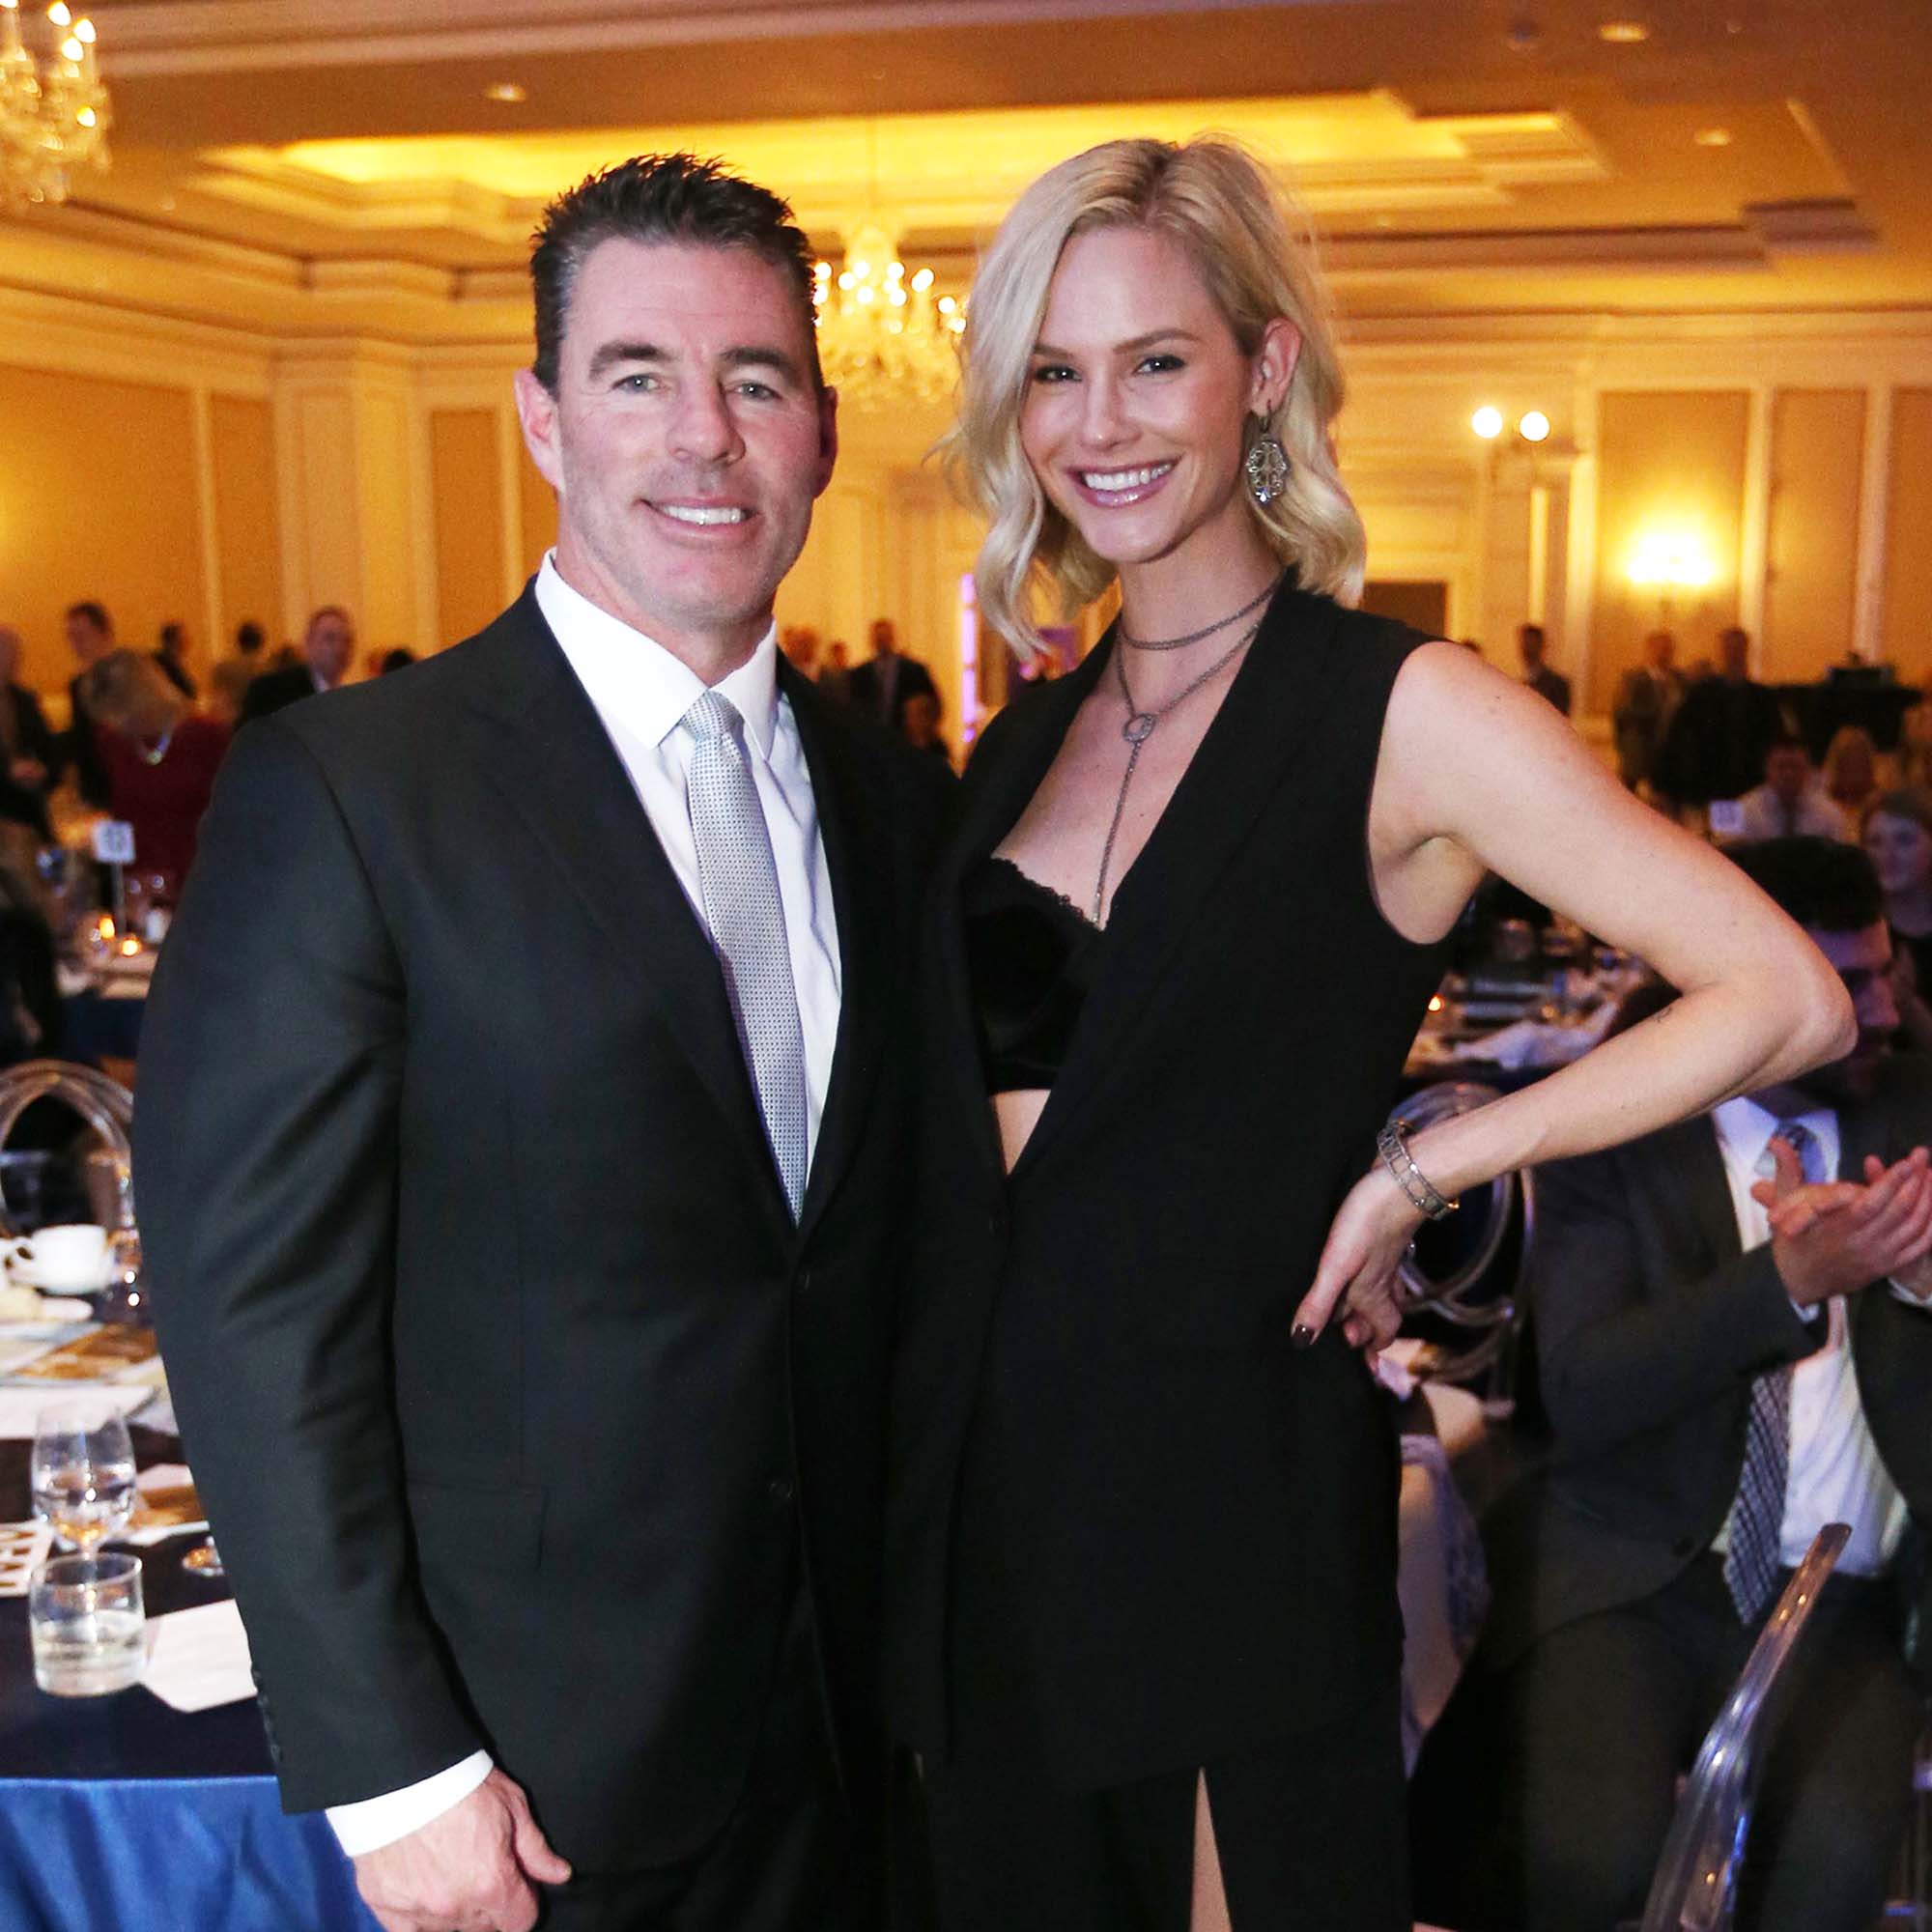 MLB star Jim Edmonds and wife Meghan joins Real Housewives Of OC